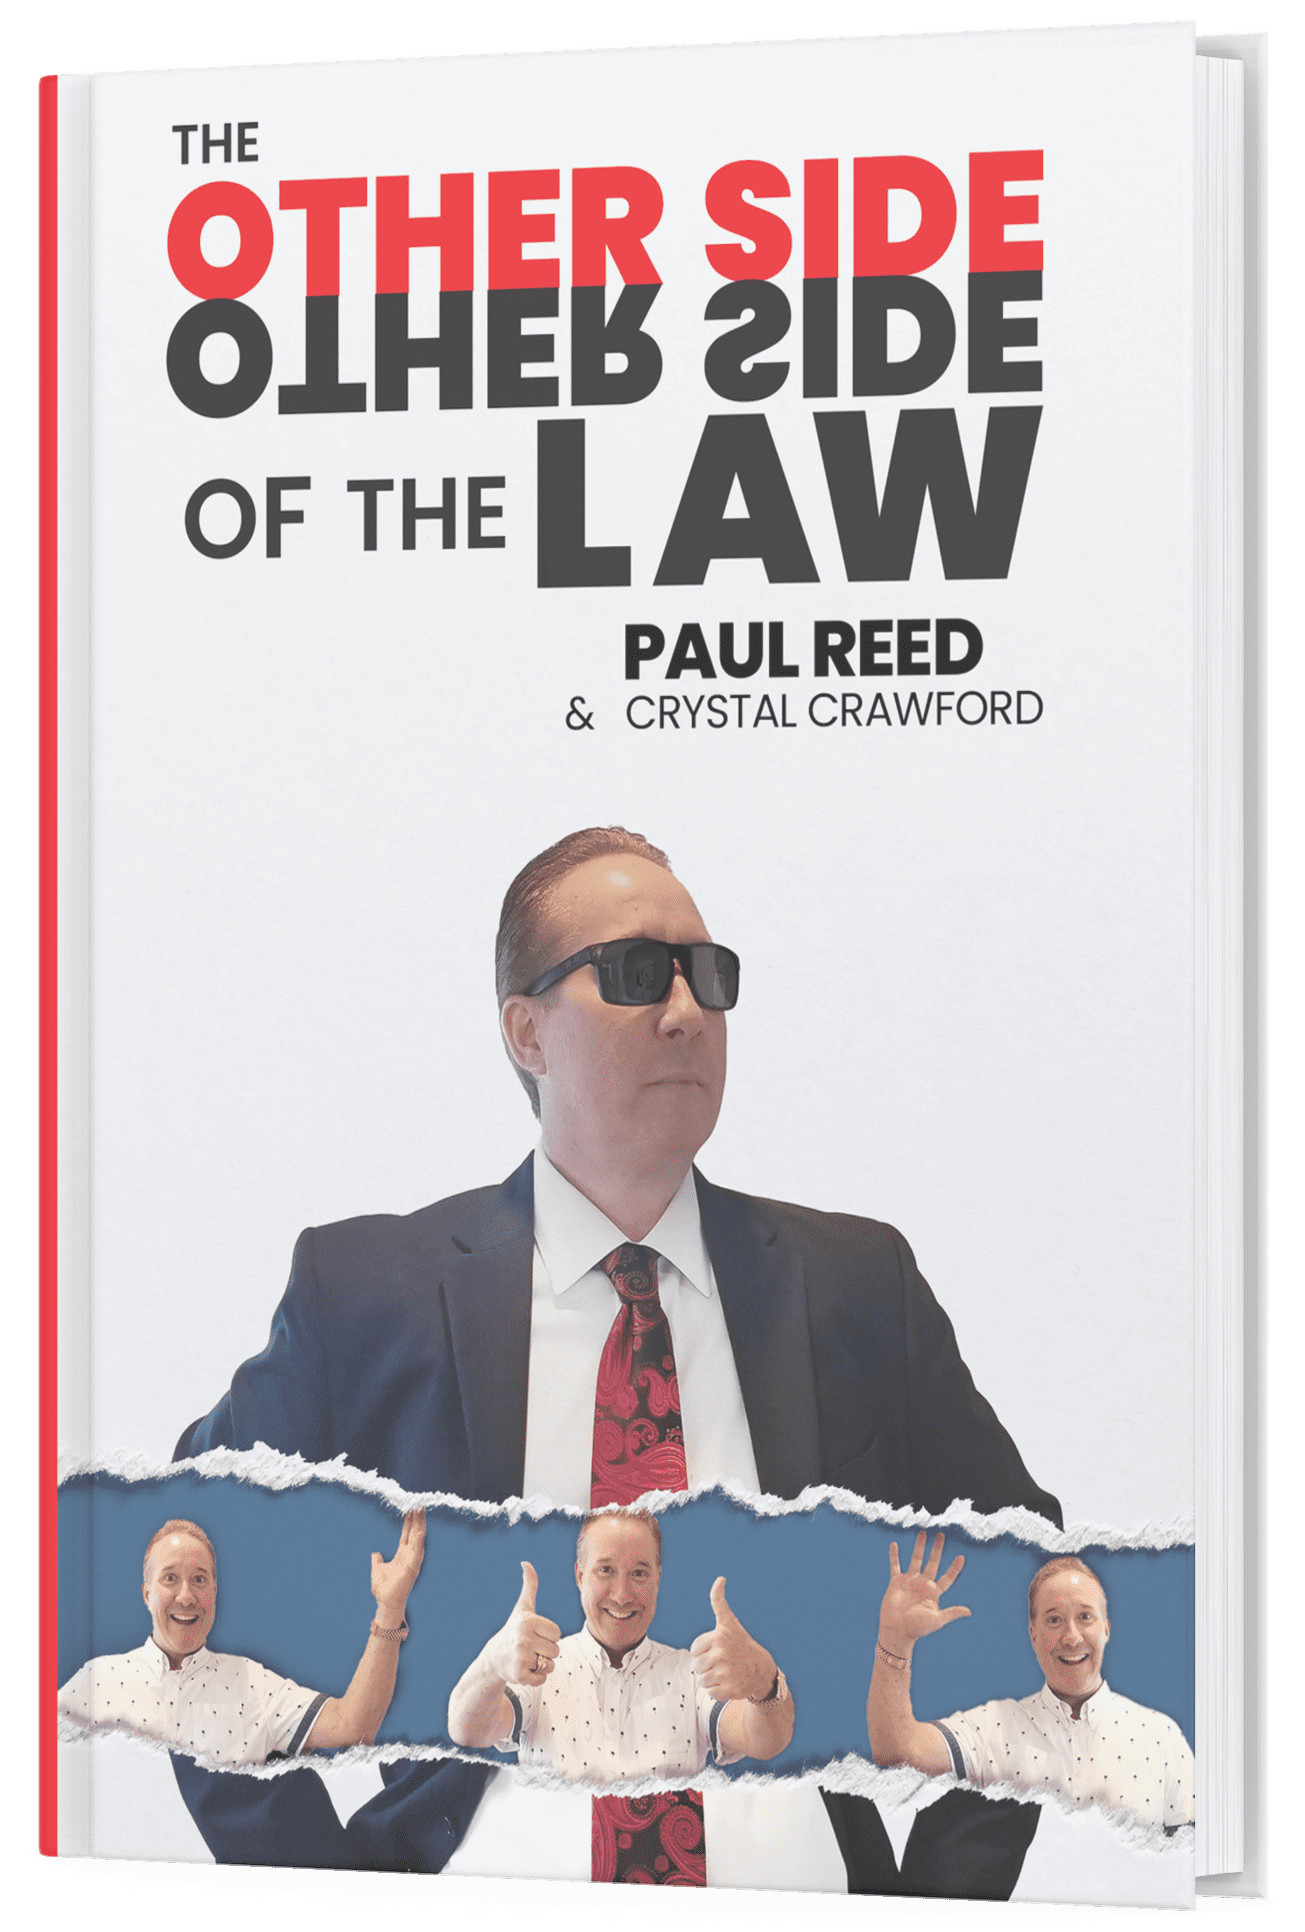 The other side of the law book cover